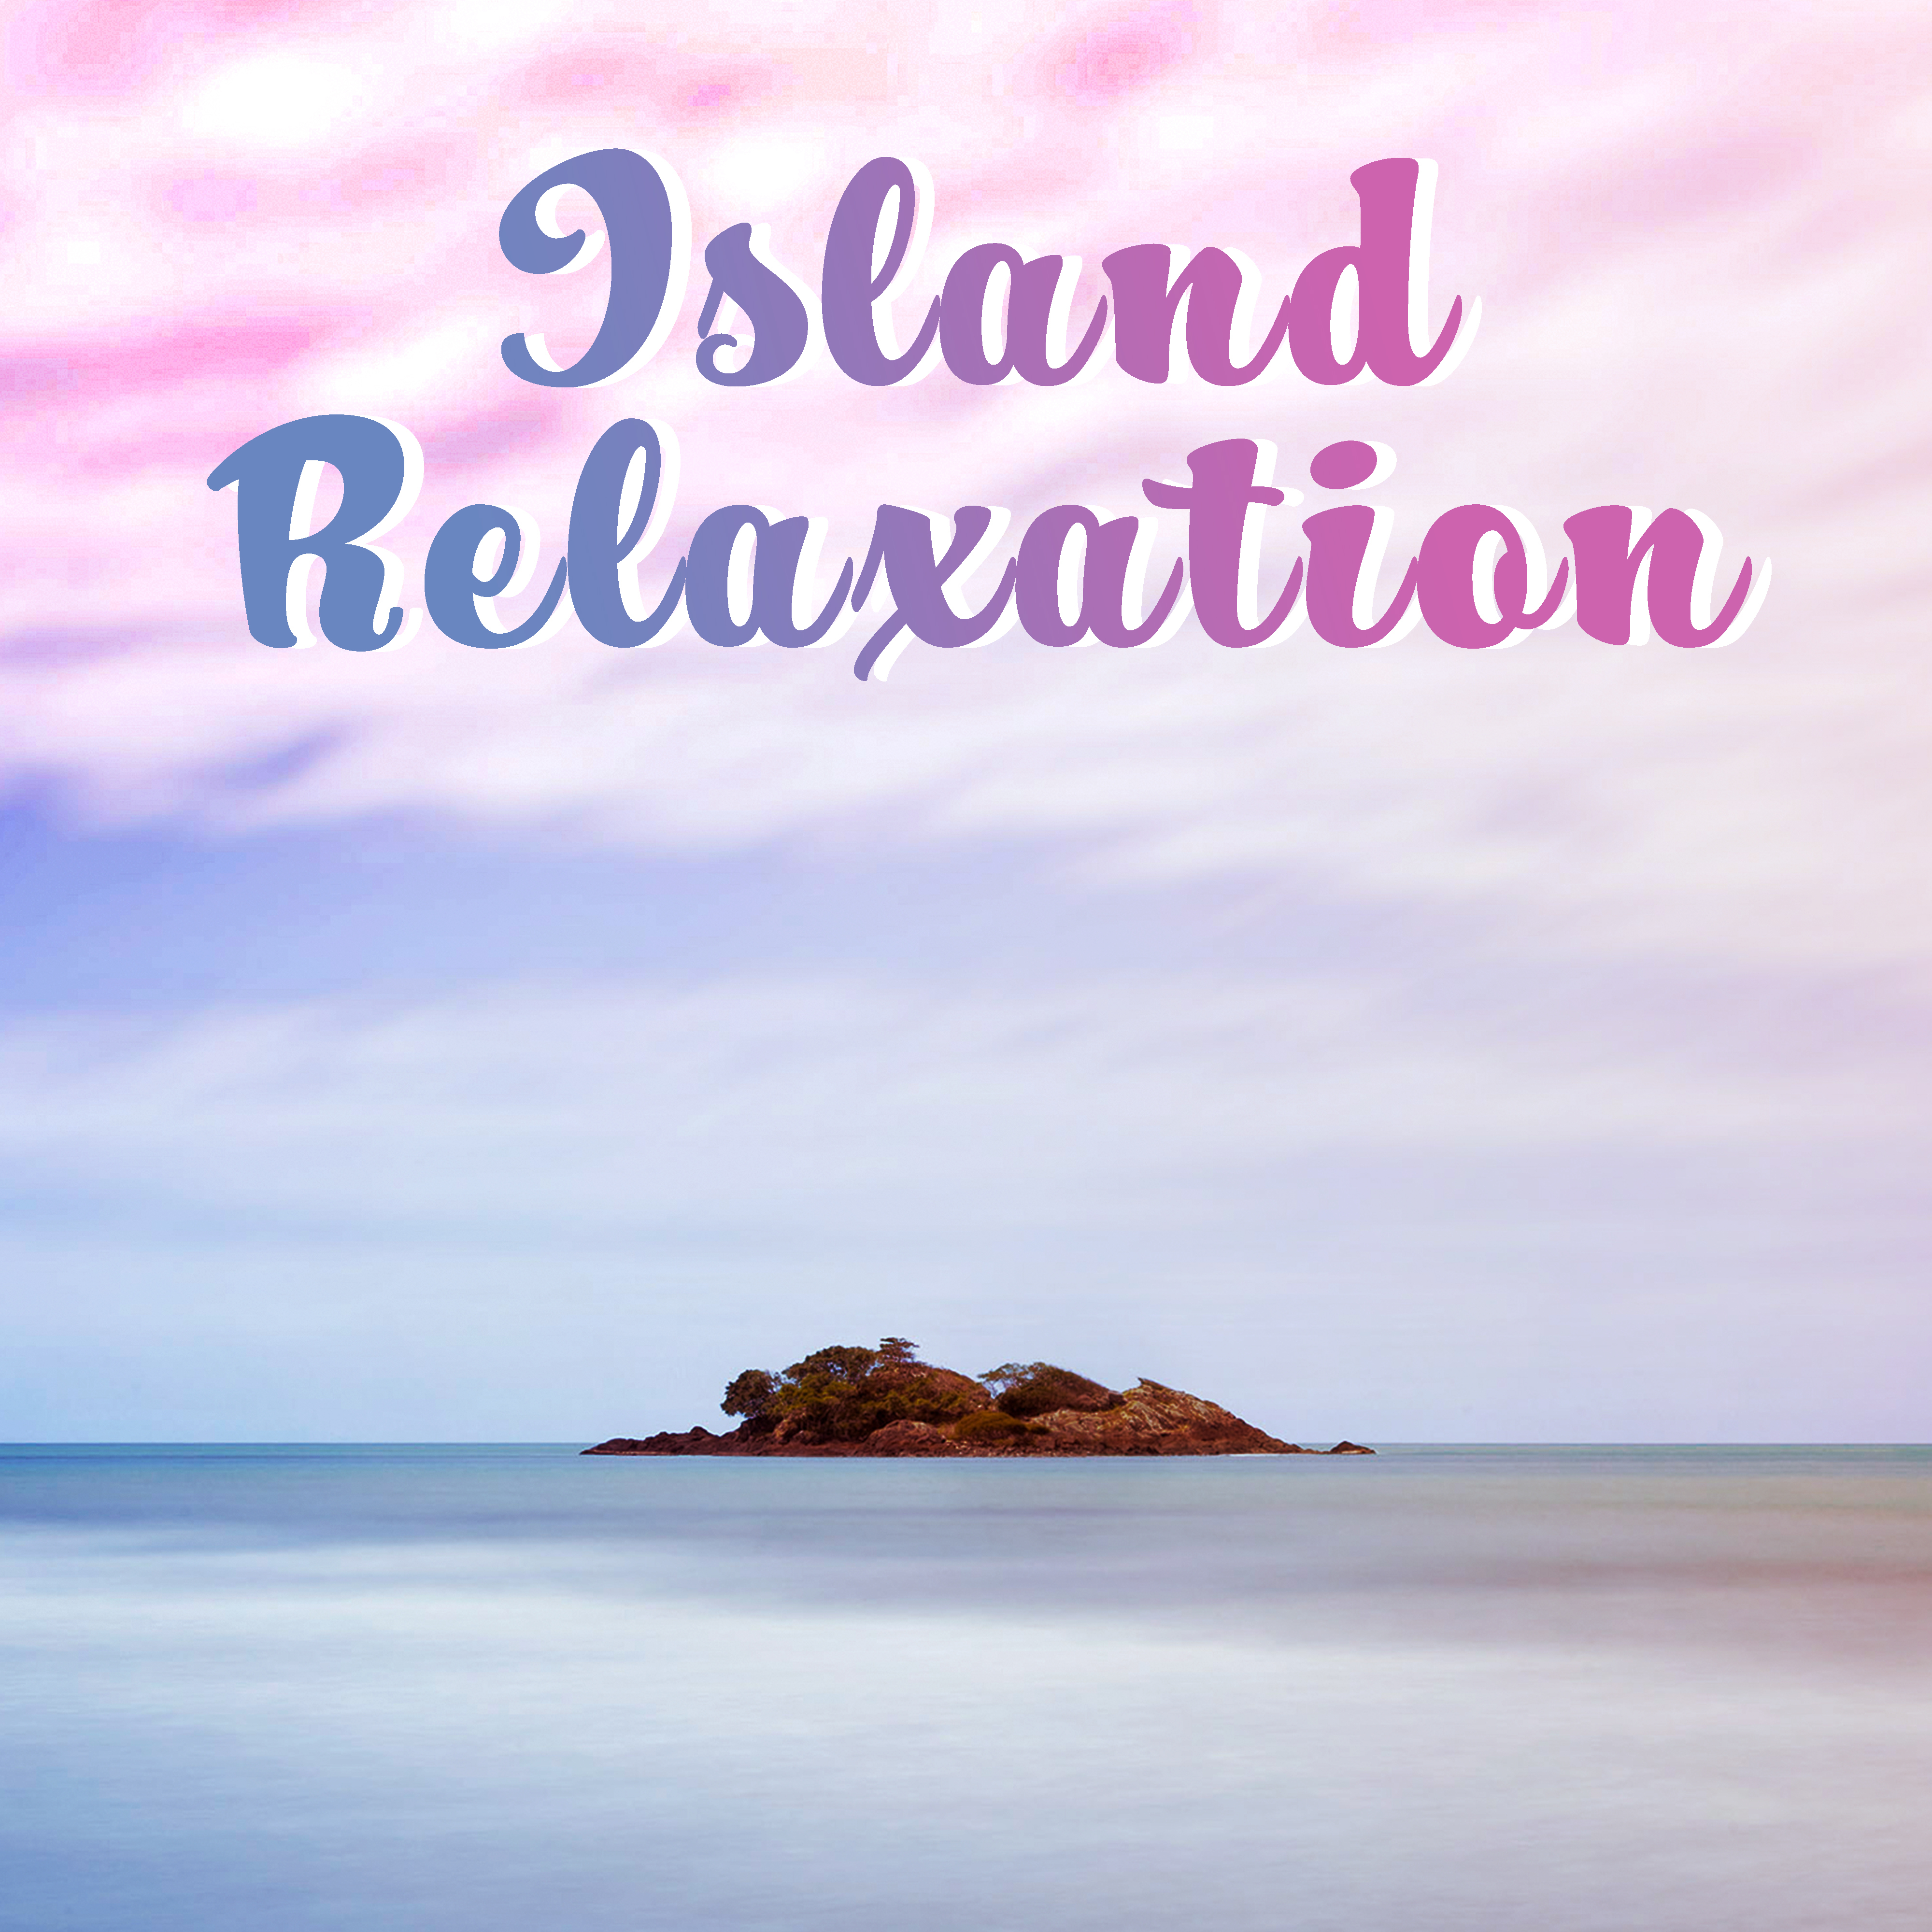 Island Relaxation – Summer Chill Out, Stress Relief, Peaceful Music, Holiday Journey, Tropical Island